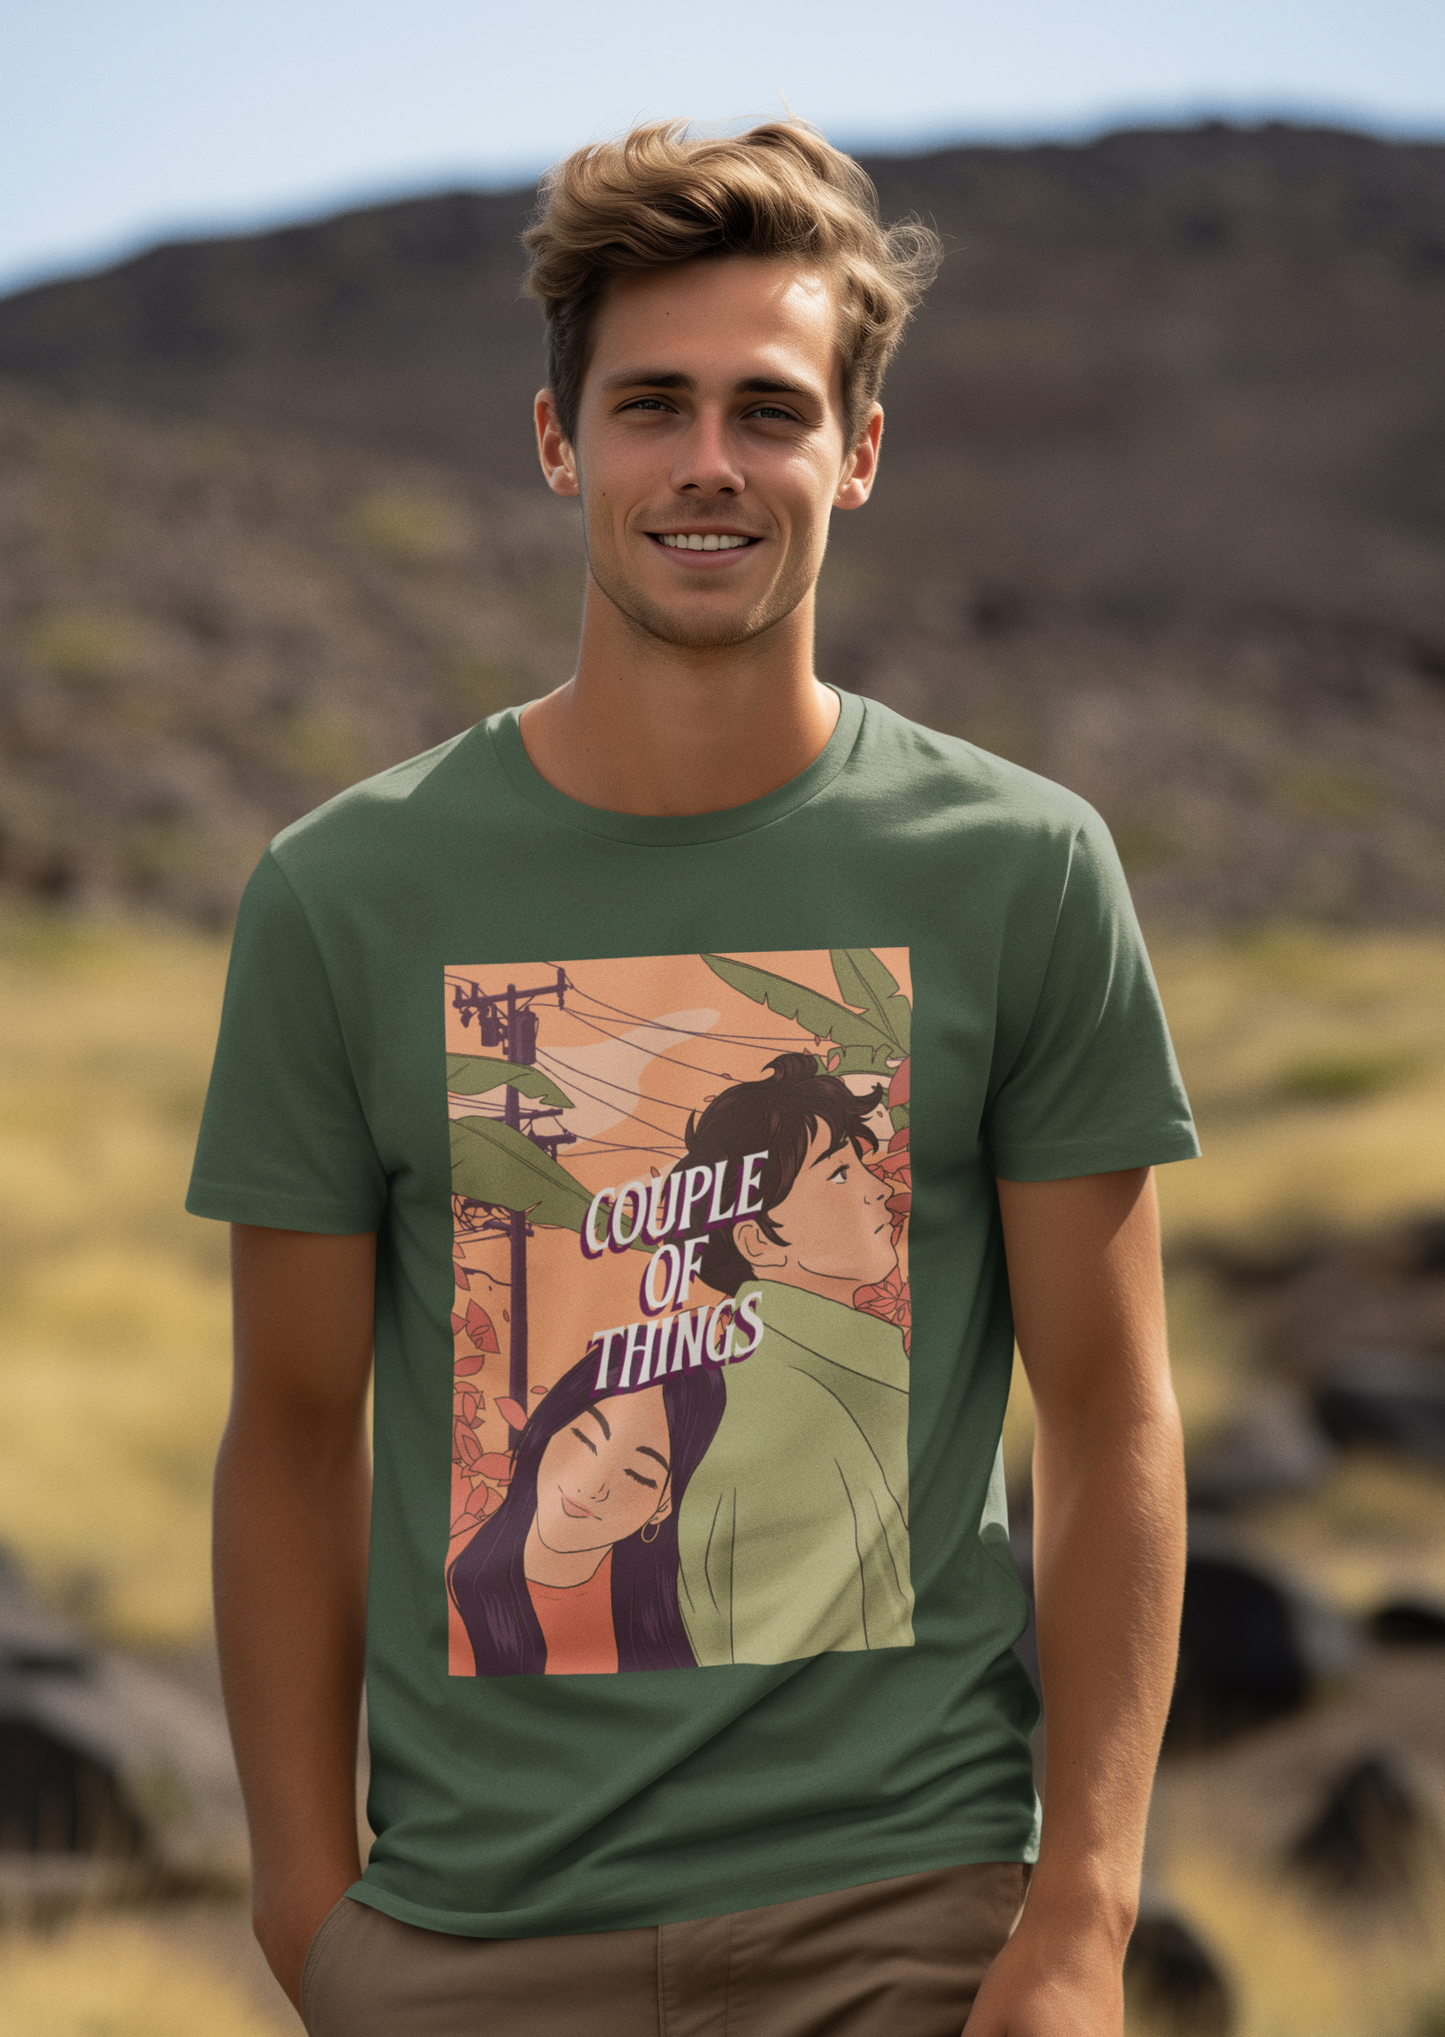 Couple Of Things Anime Olive Green Round Neck T-Shirt For Men | RJ Anmol Collection